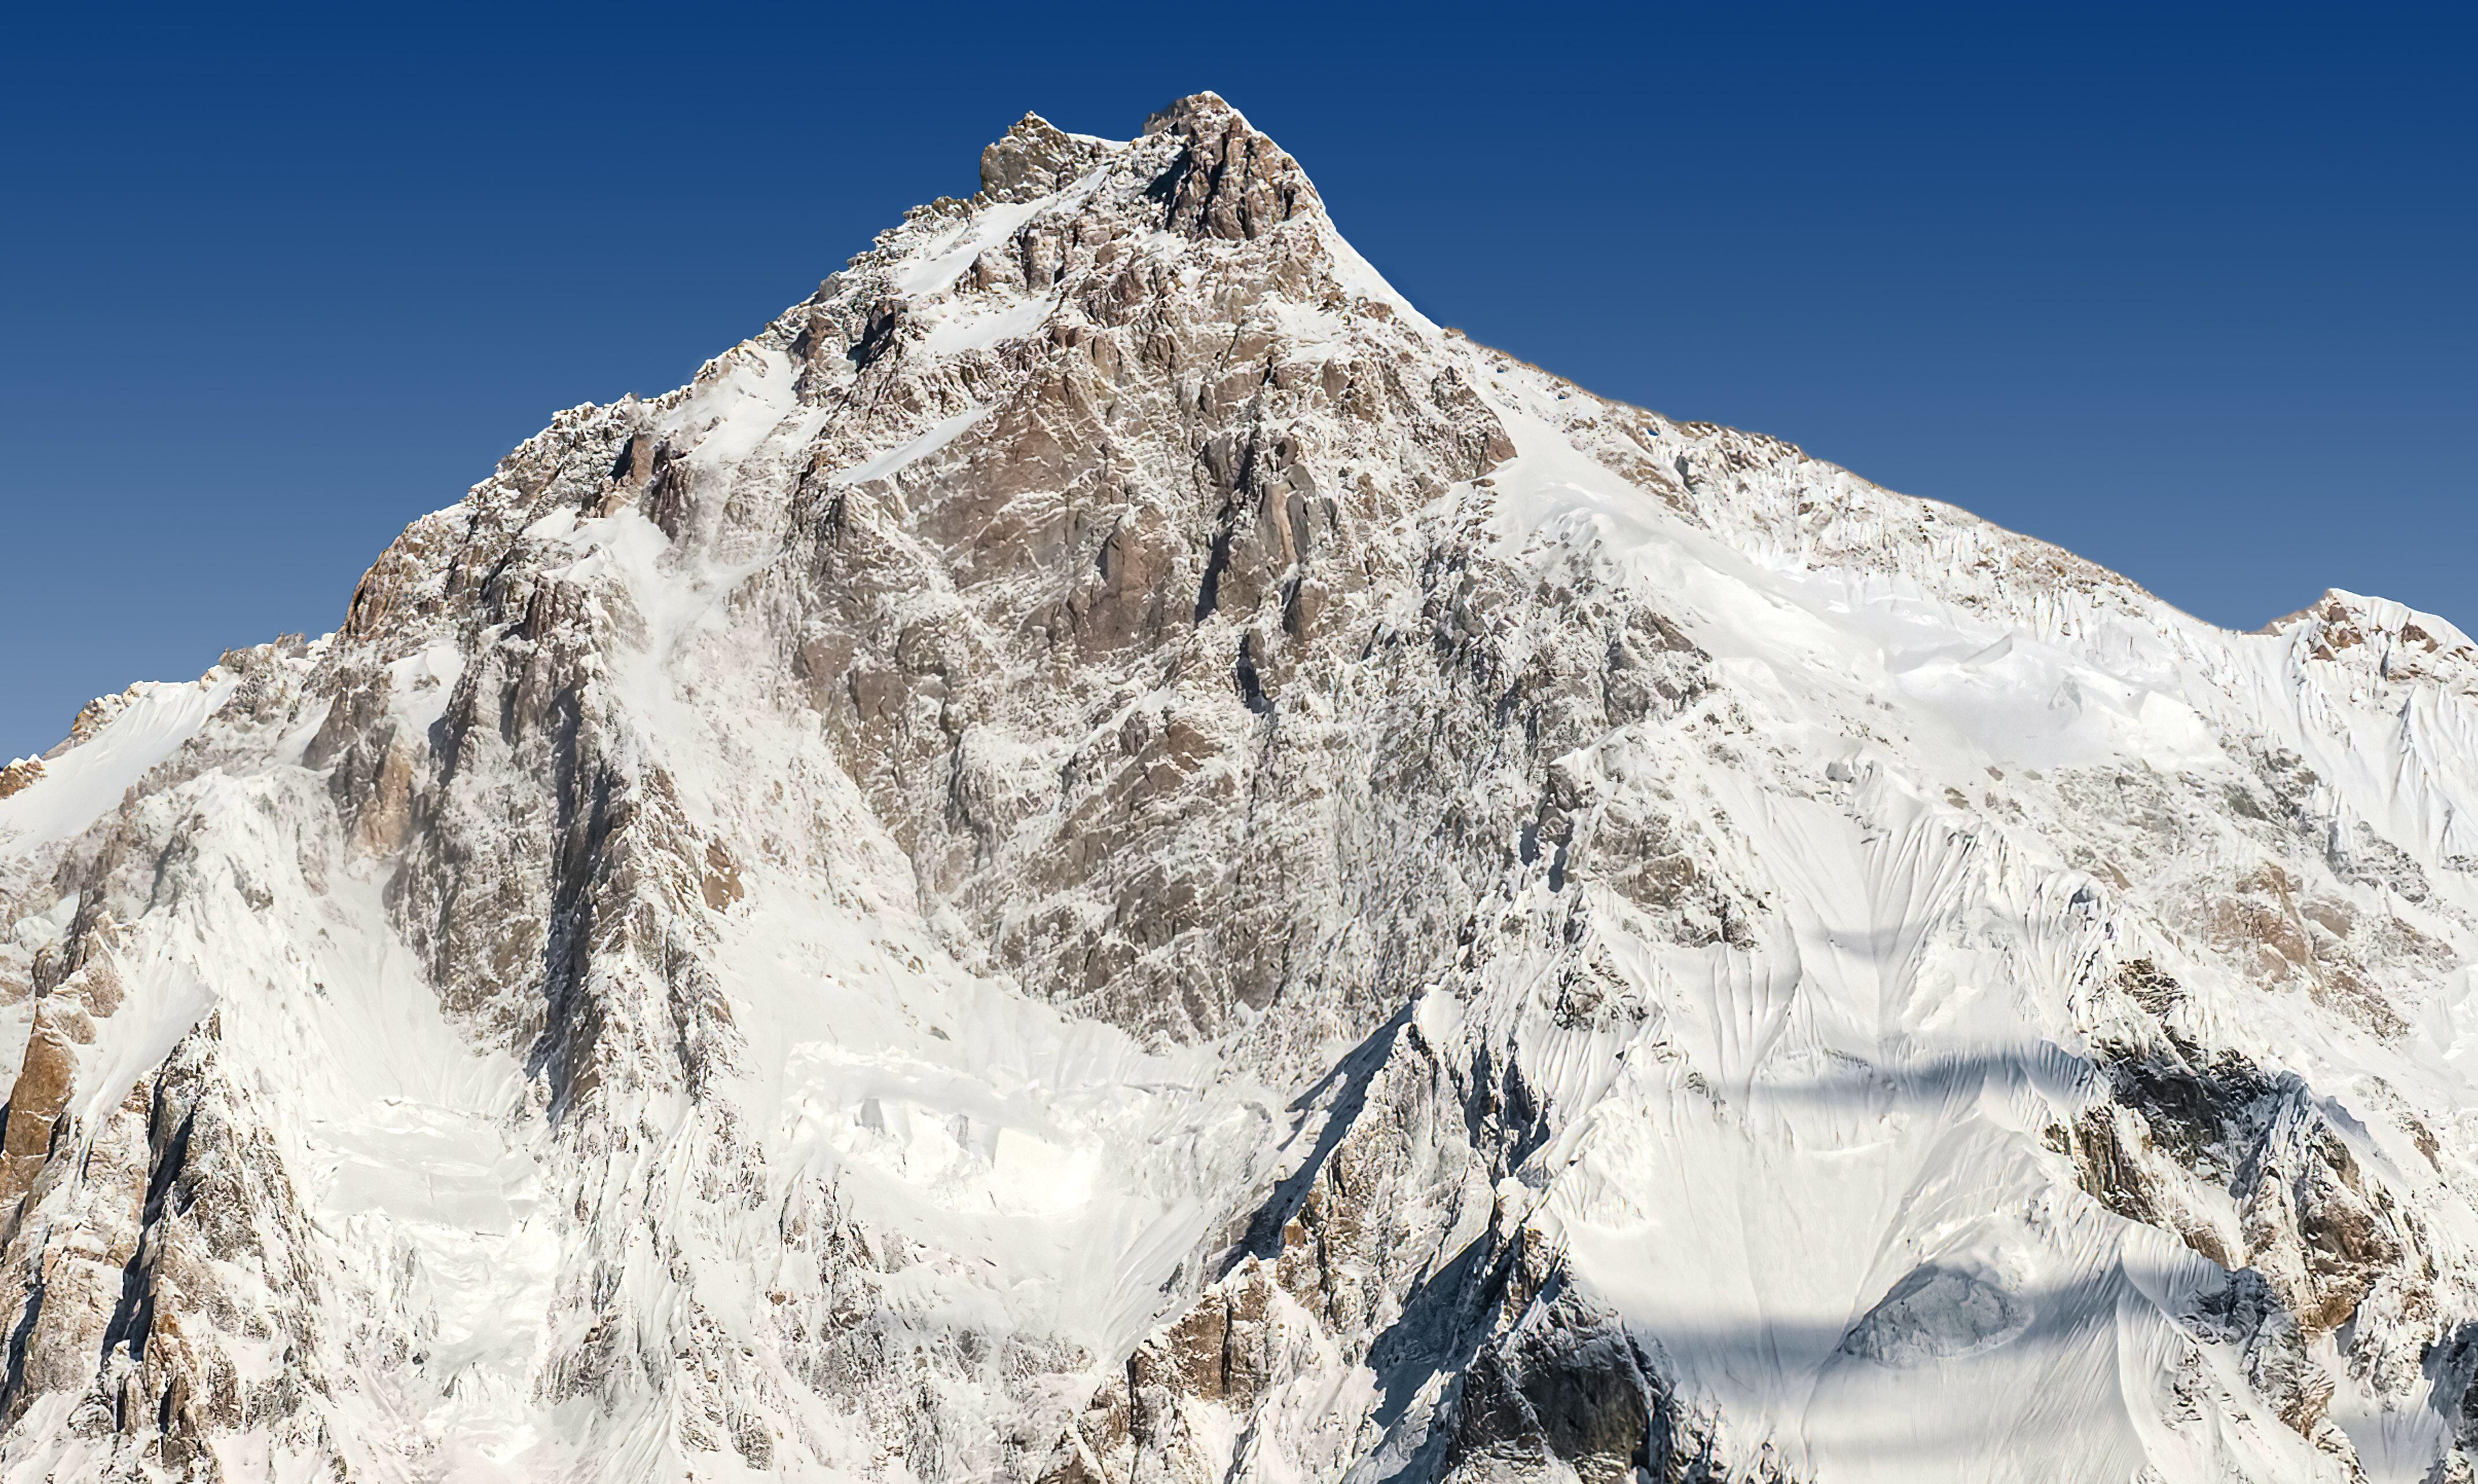 Mount Everest will not always be the tallest mountain in the world